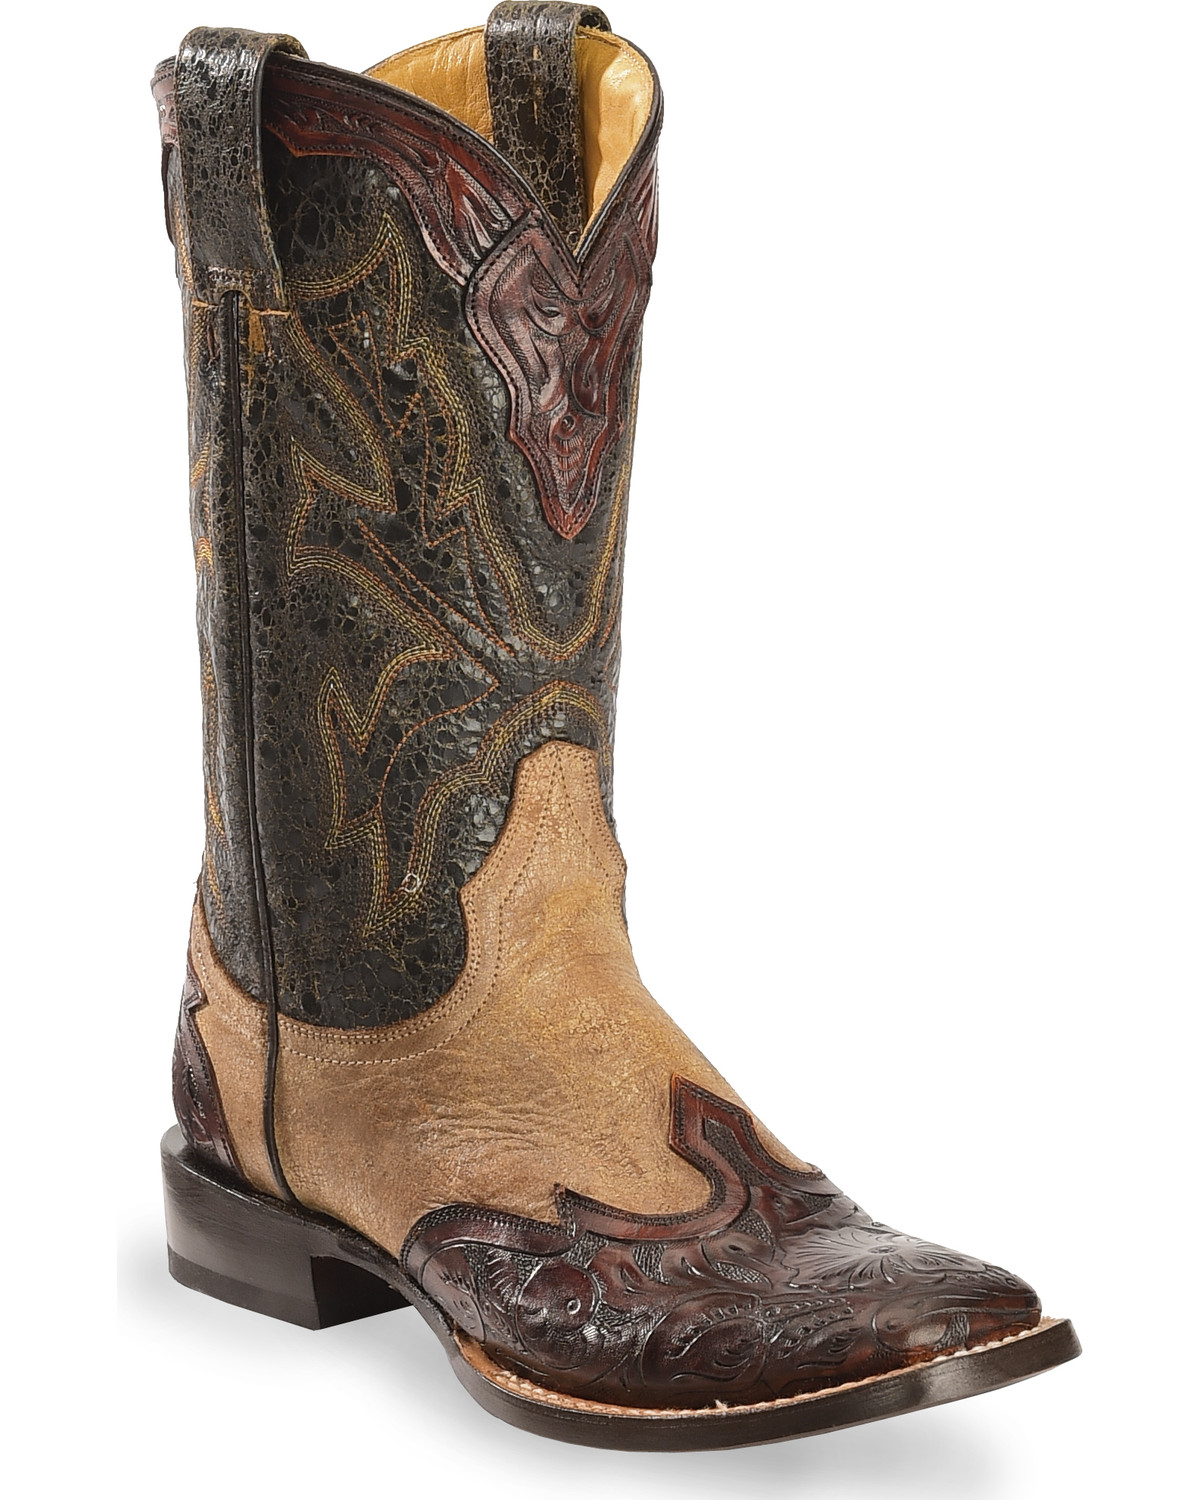 Stetson Women's Hand-Tooled Western Boots | Boot Barn